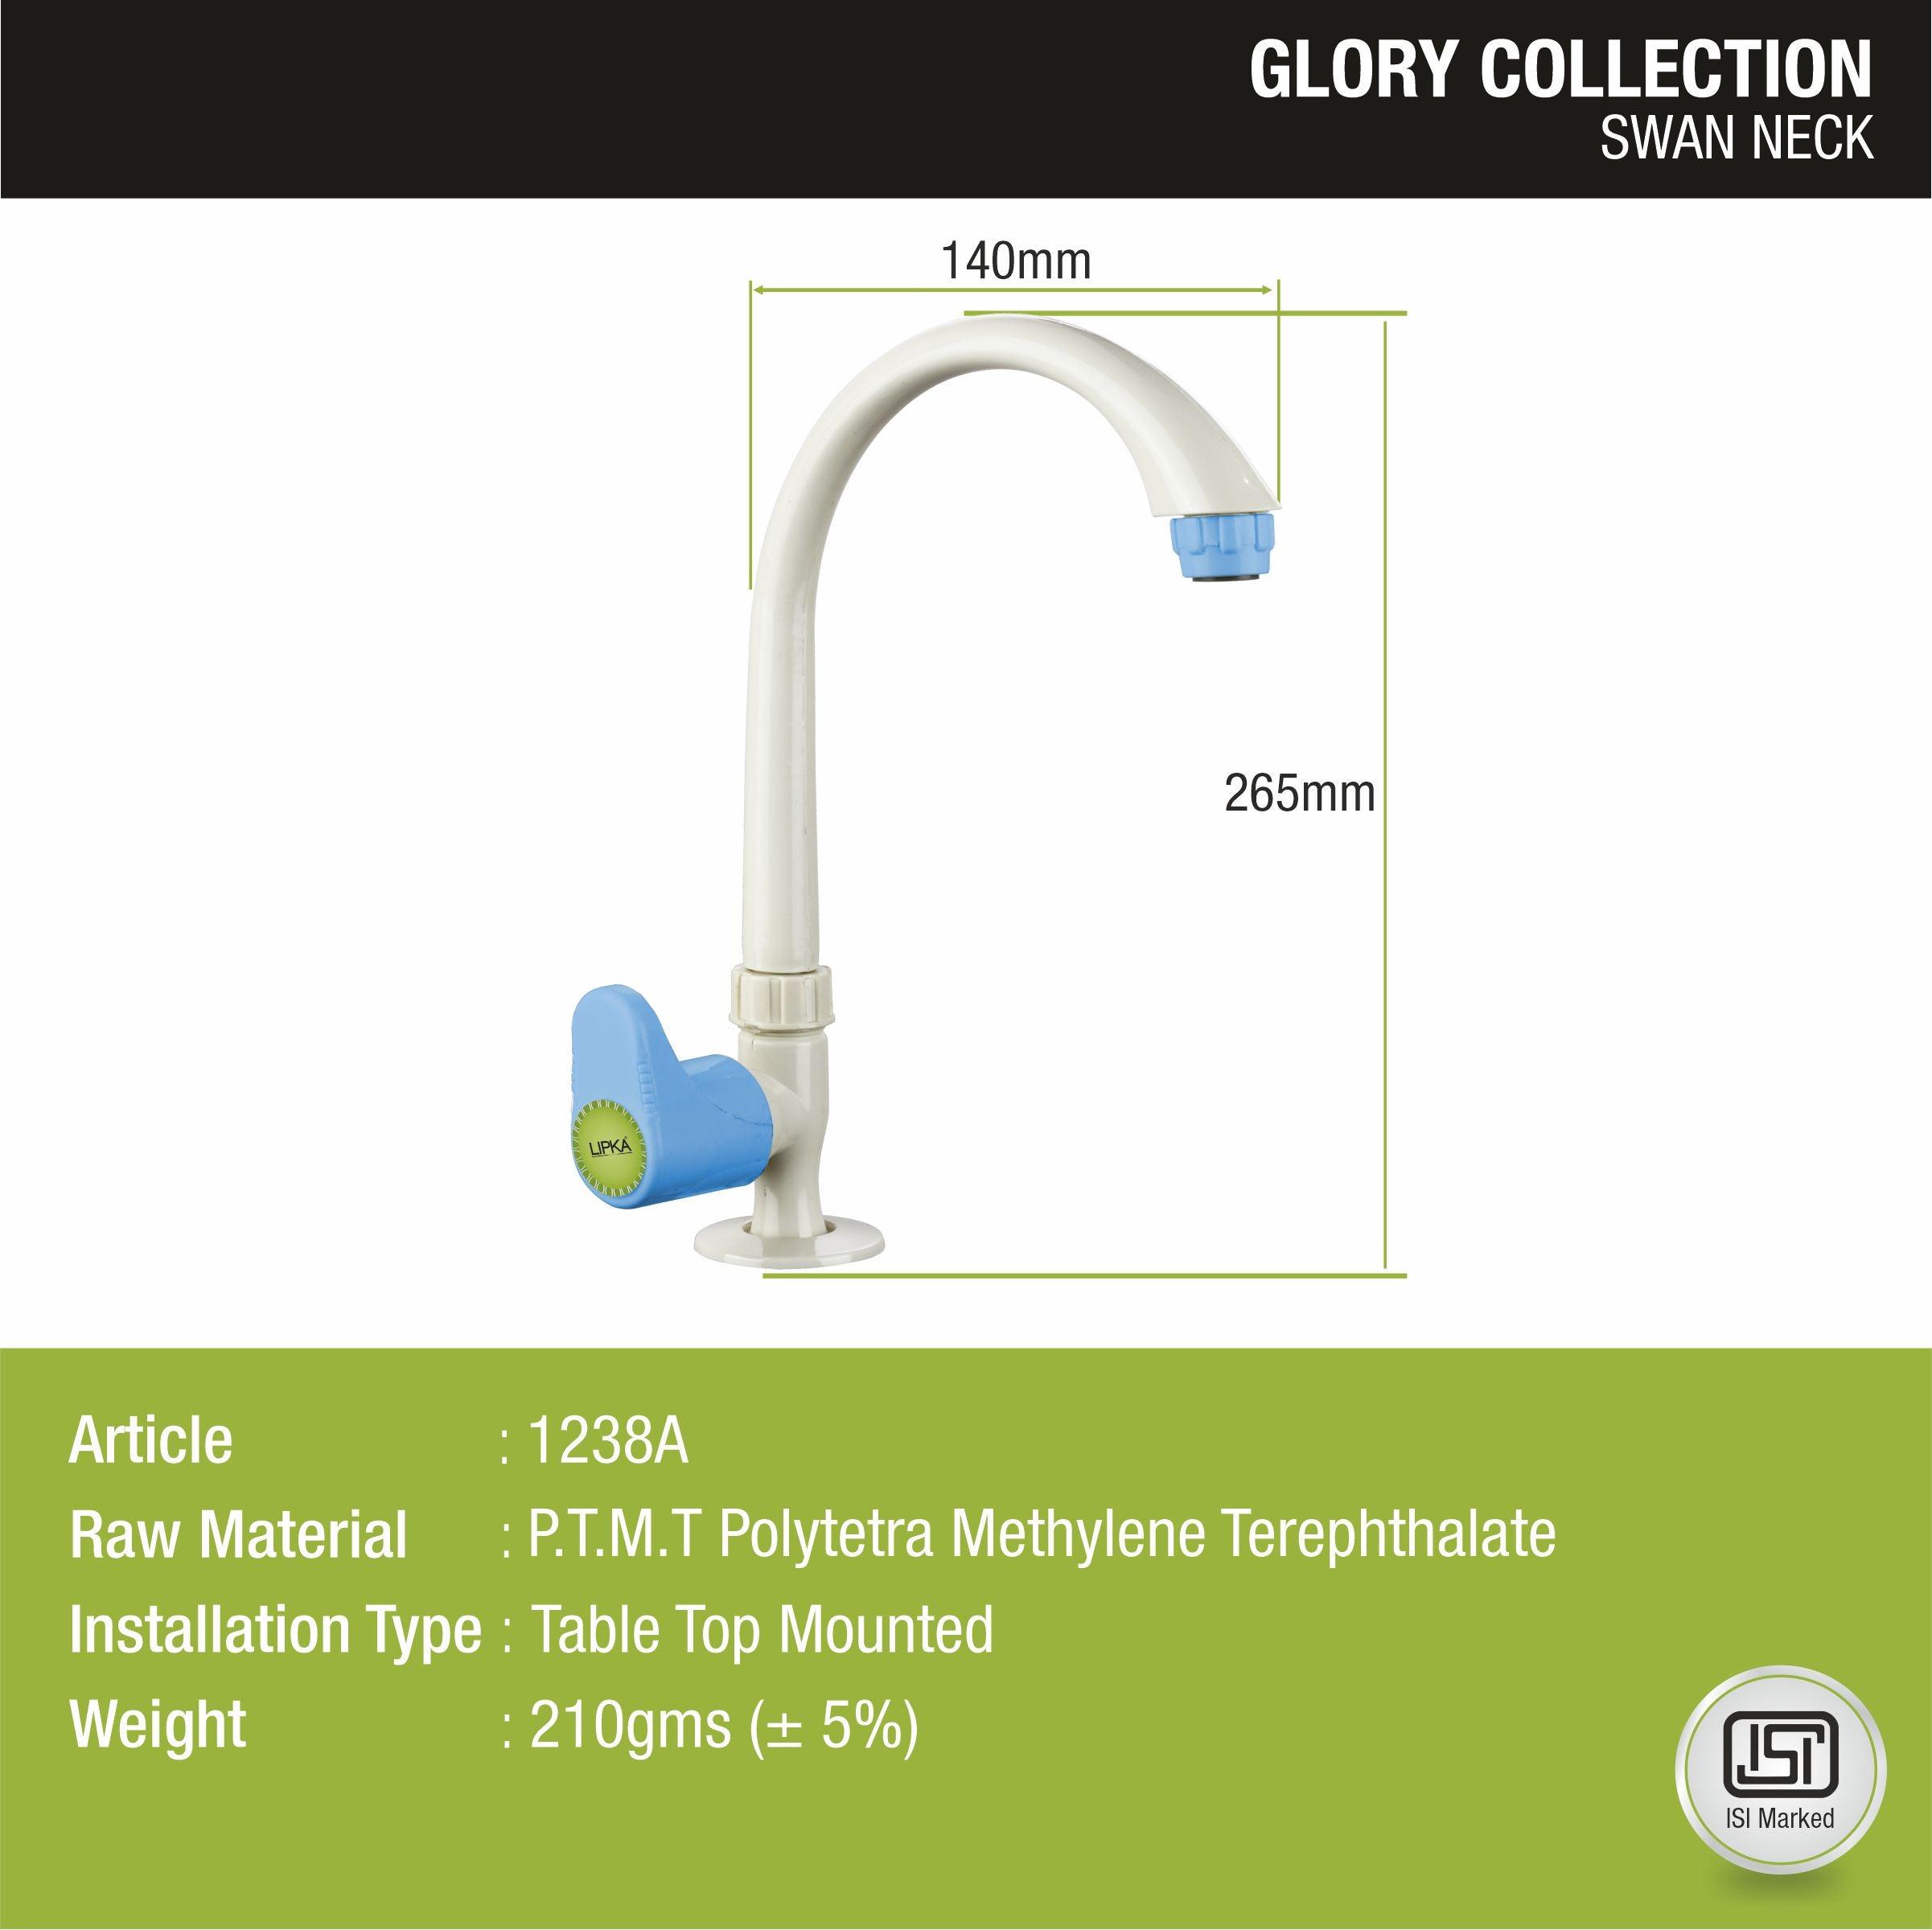 Glory PTMT Swan Neck Faucet sizes and dimensions